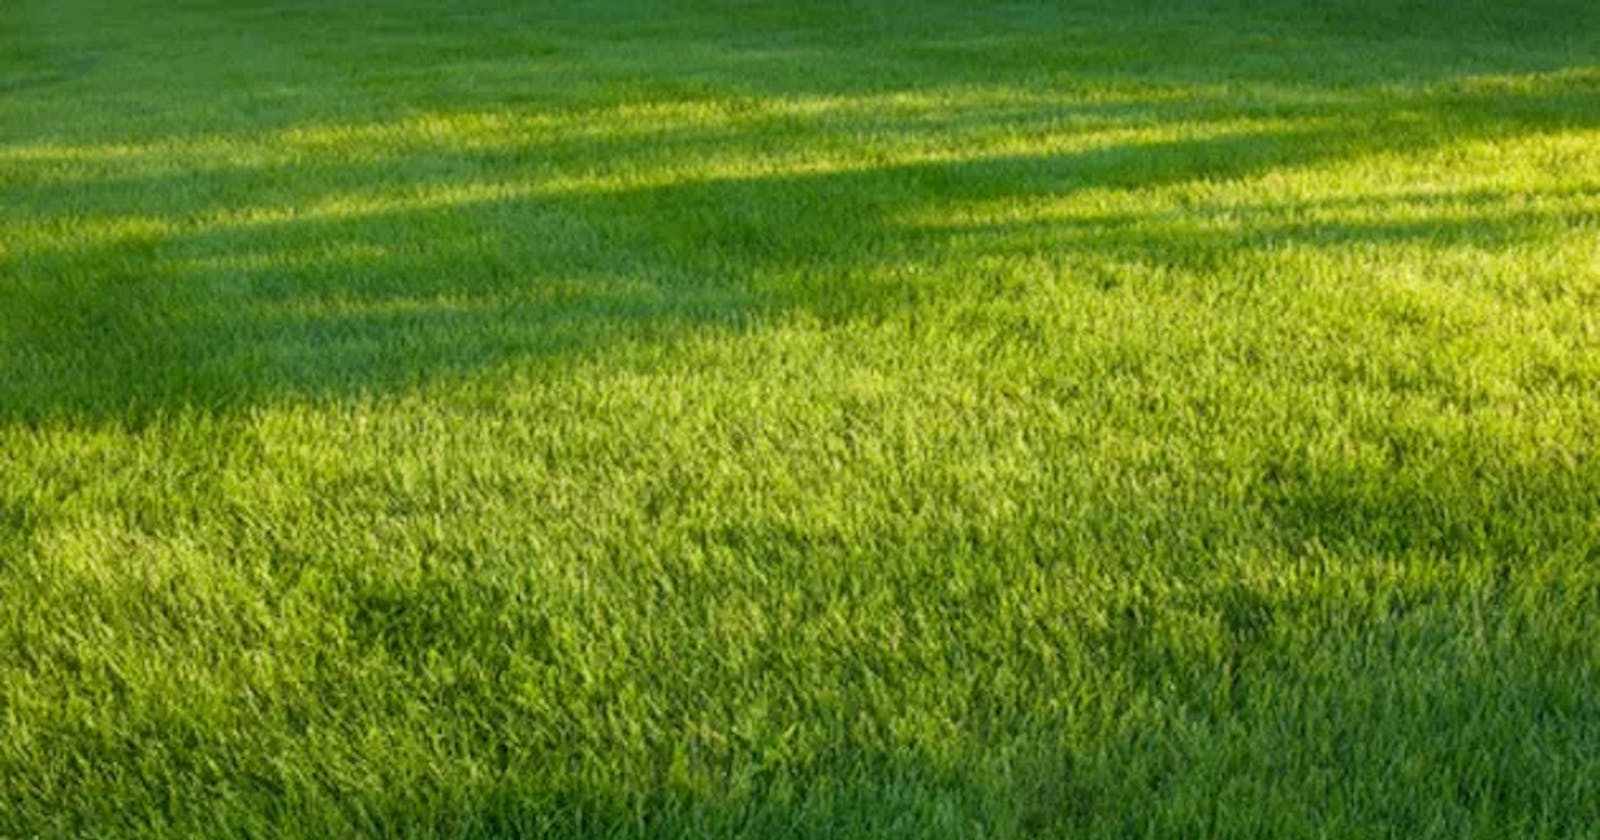 Keeping a Weed Free Lawn